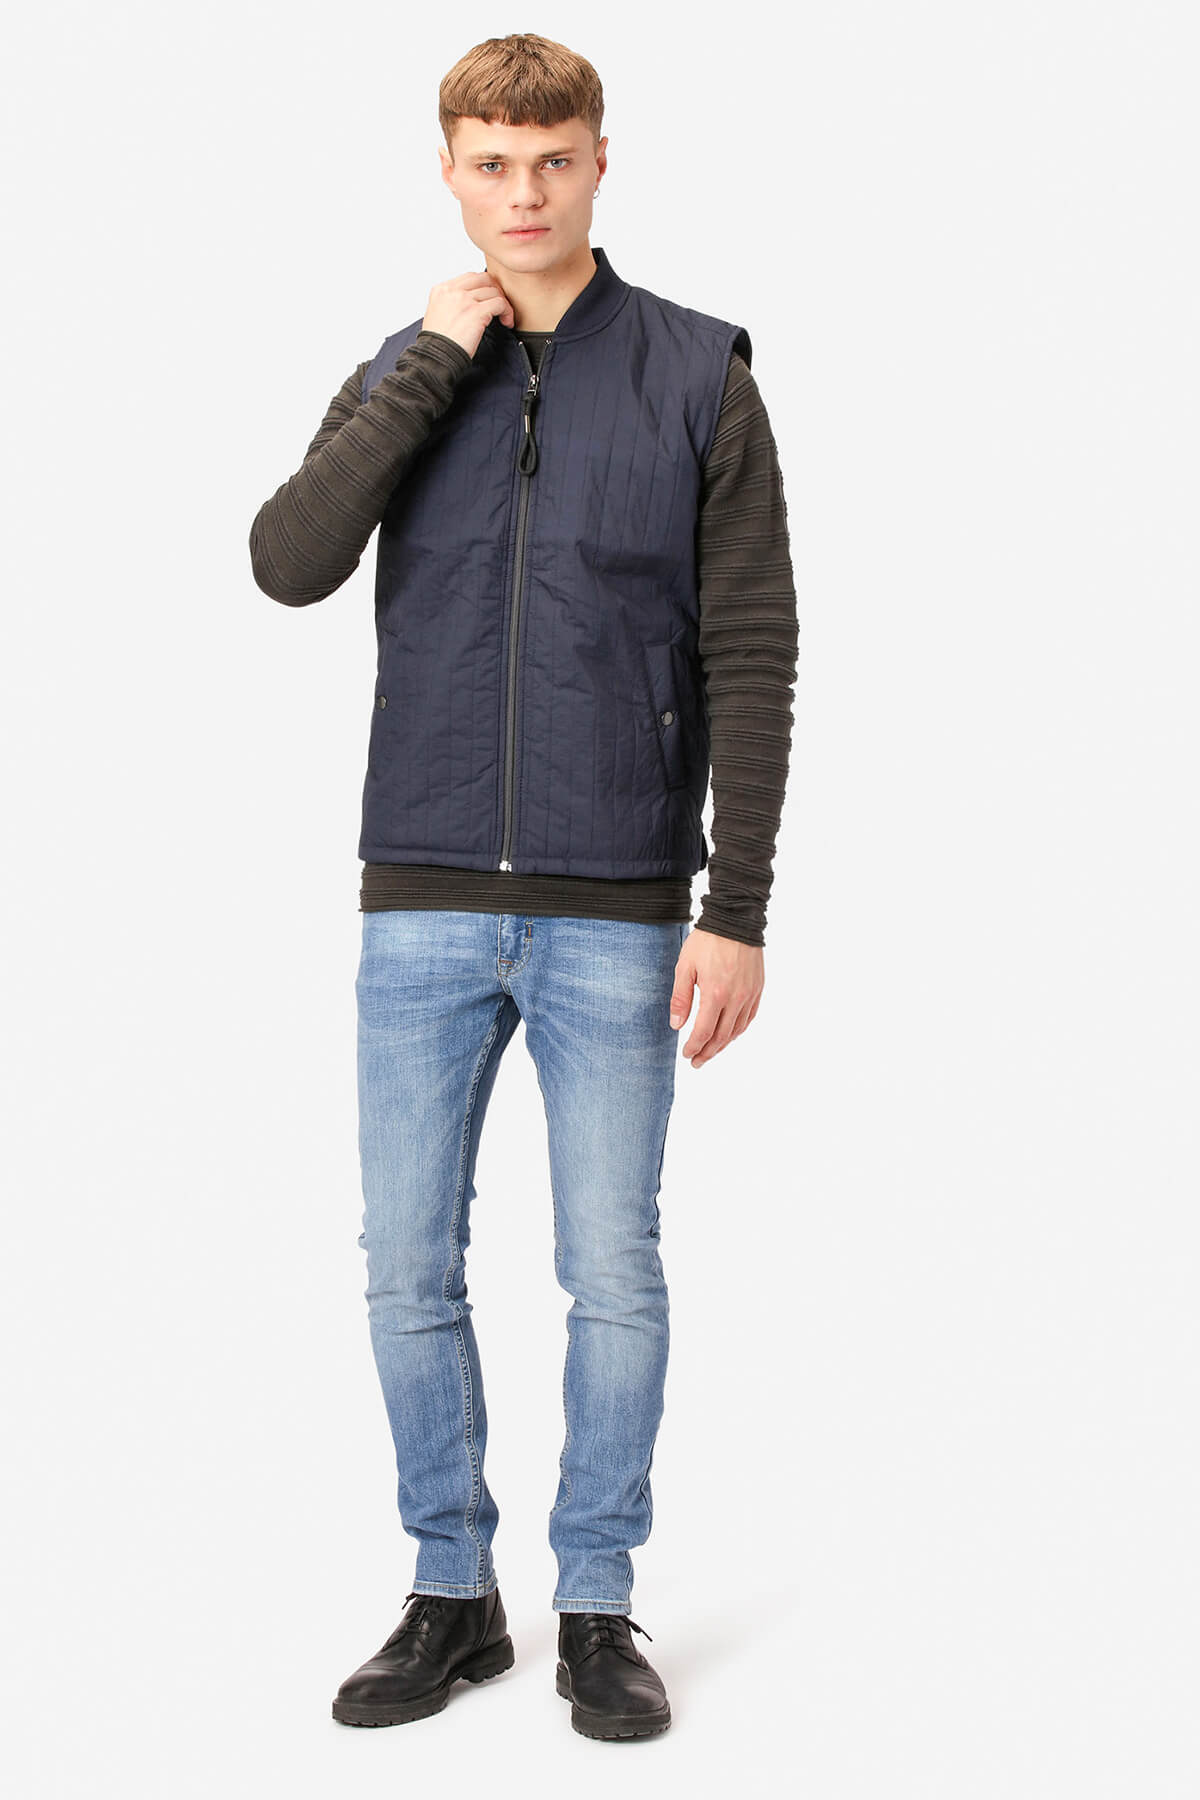 Marcus Quilted Vest Billy